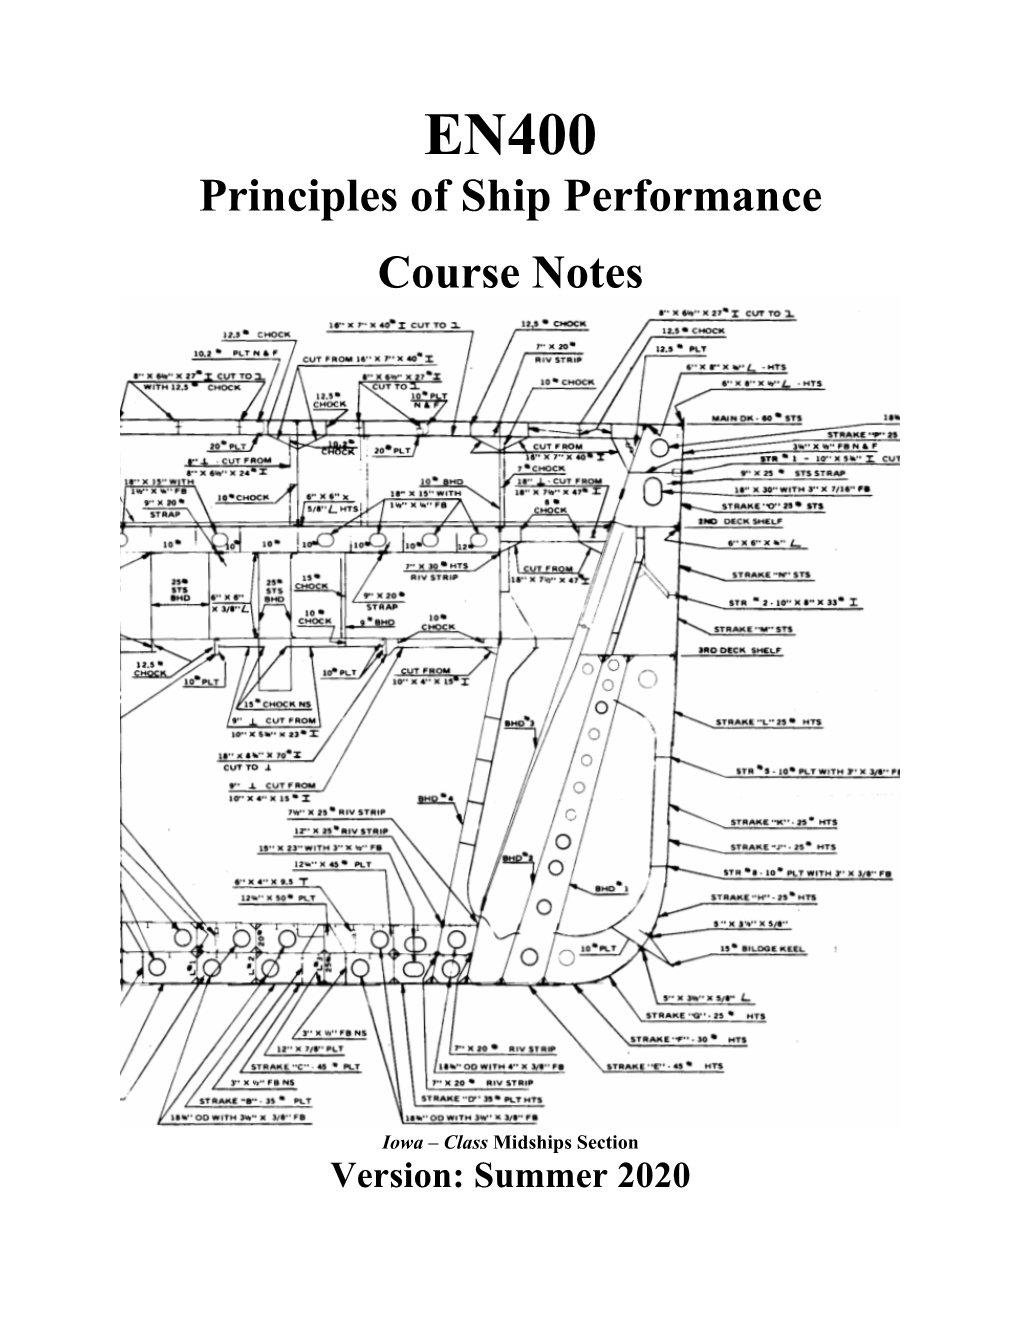 Principles of Ship Performance Course Notes